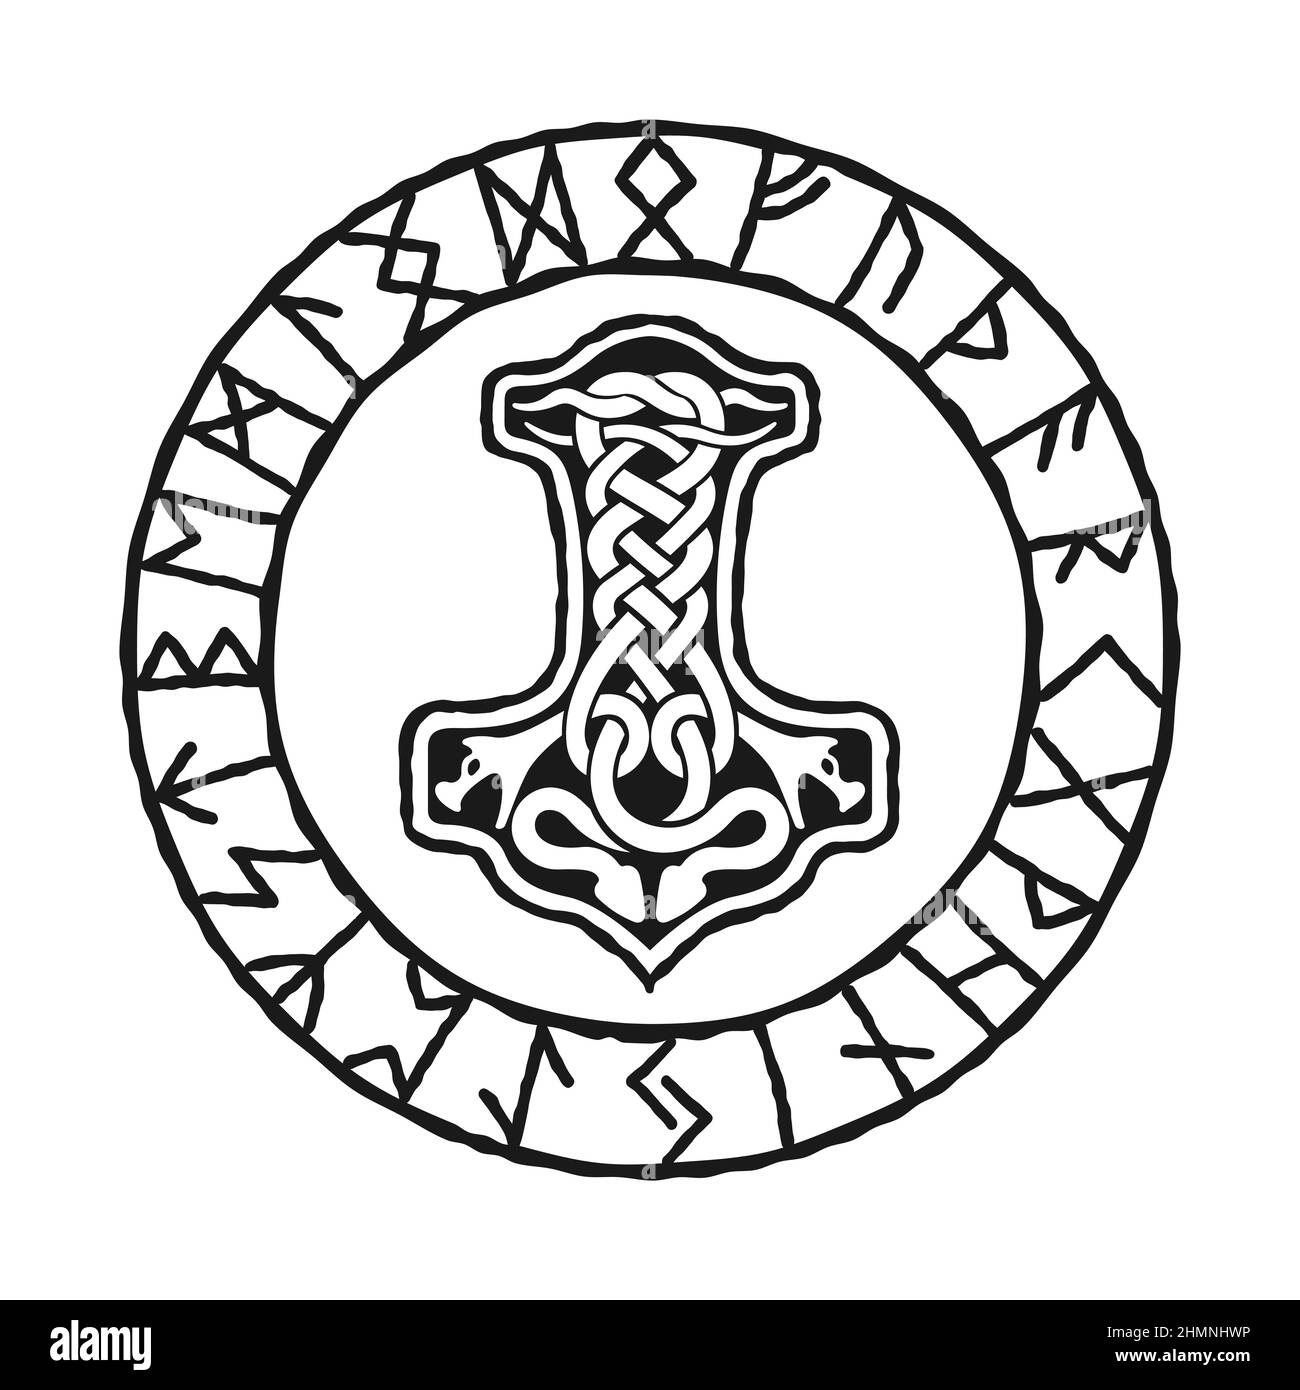 Mjolnir - Thors hammer, drawing in celtic knot design, and Norse runes ...